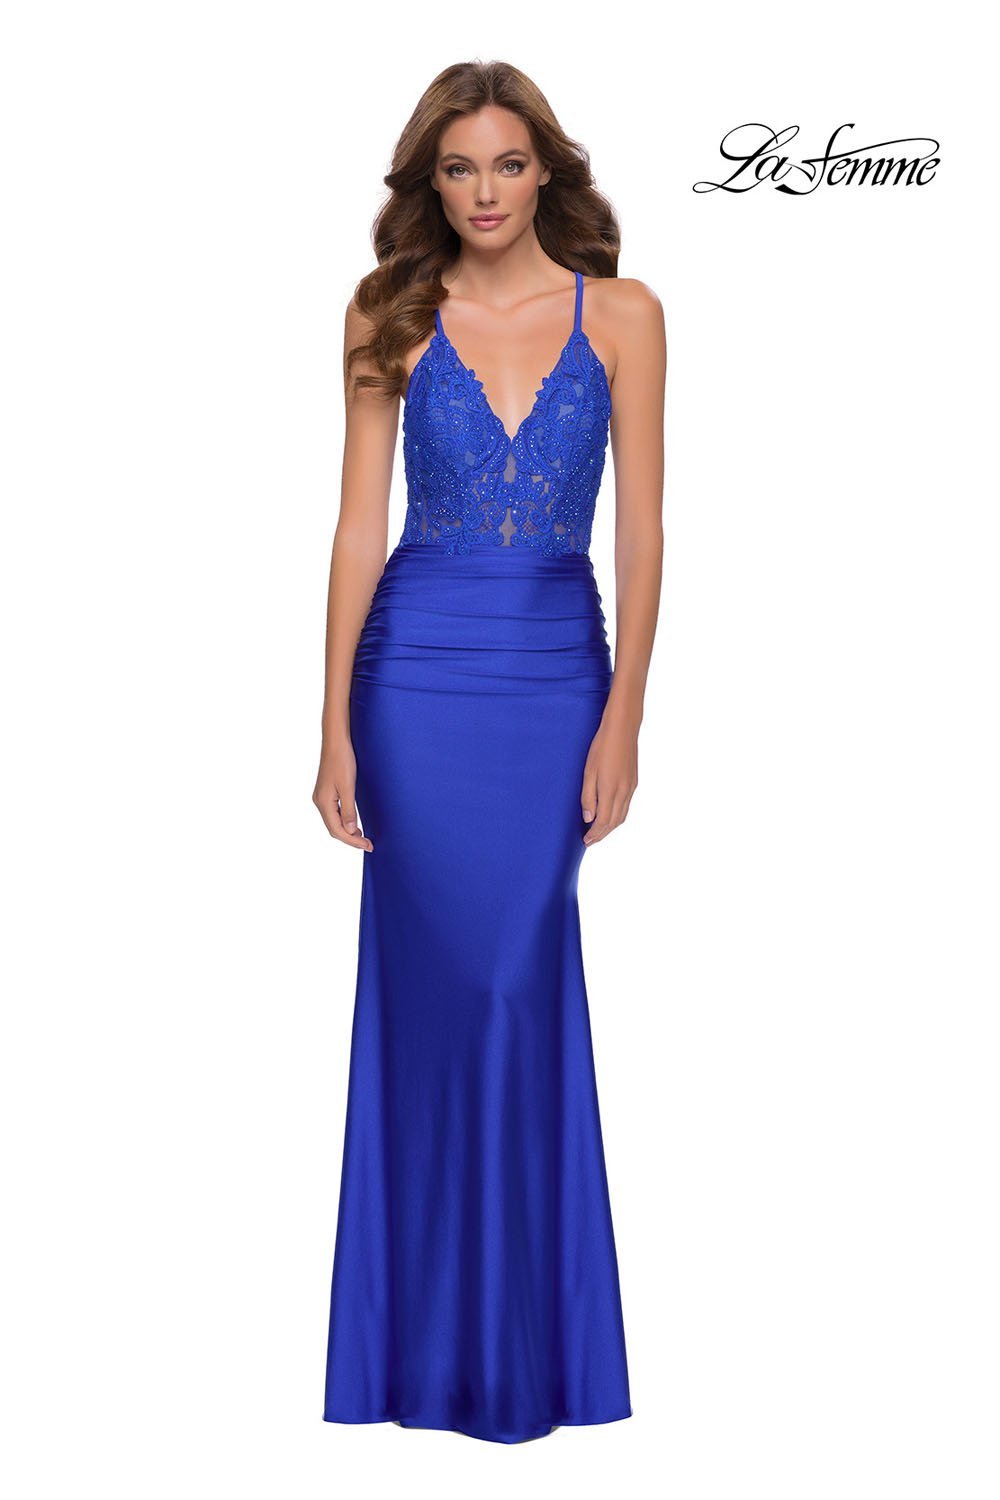 La Femme 29688 dress images in these colors: Pale Yellow, Royal Blue.